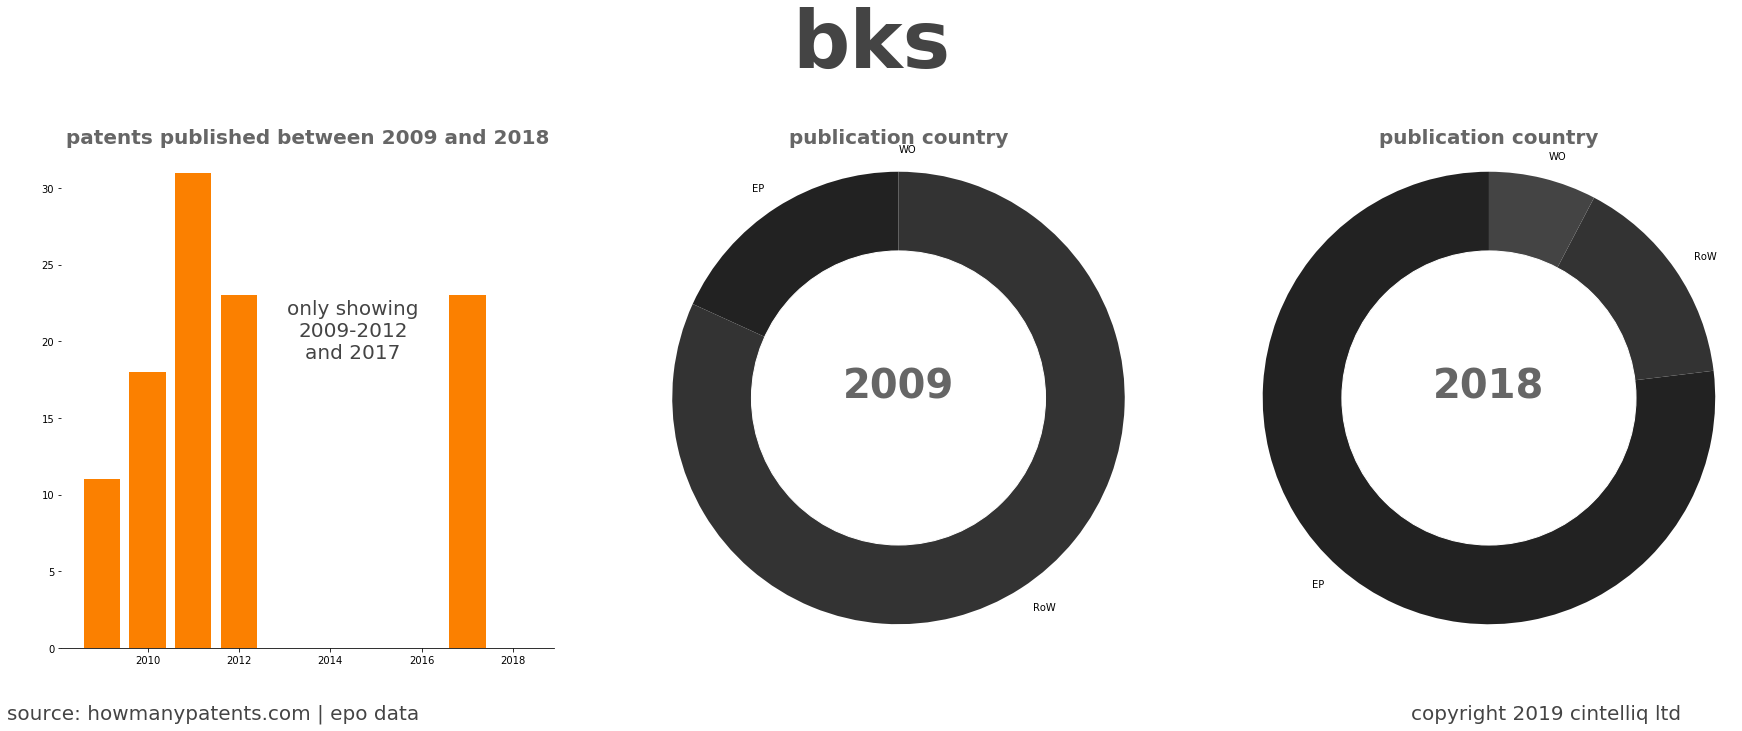 summary of patents for Bks